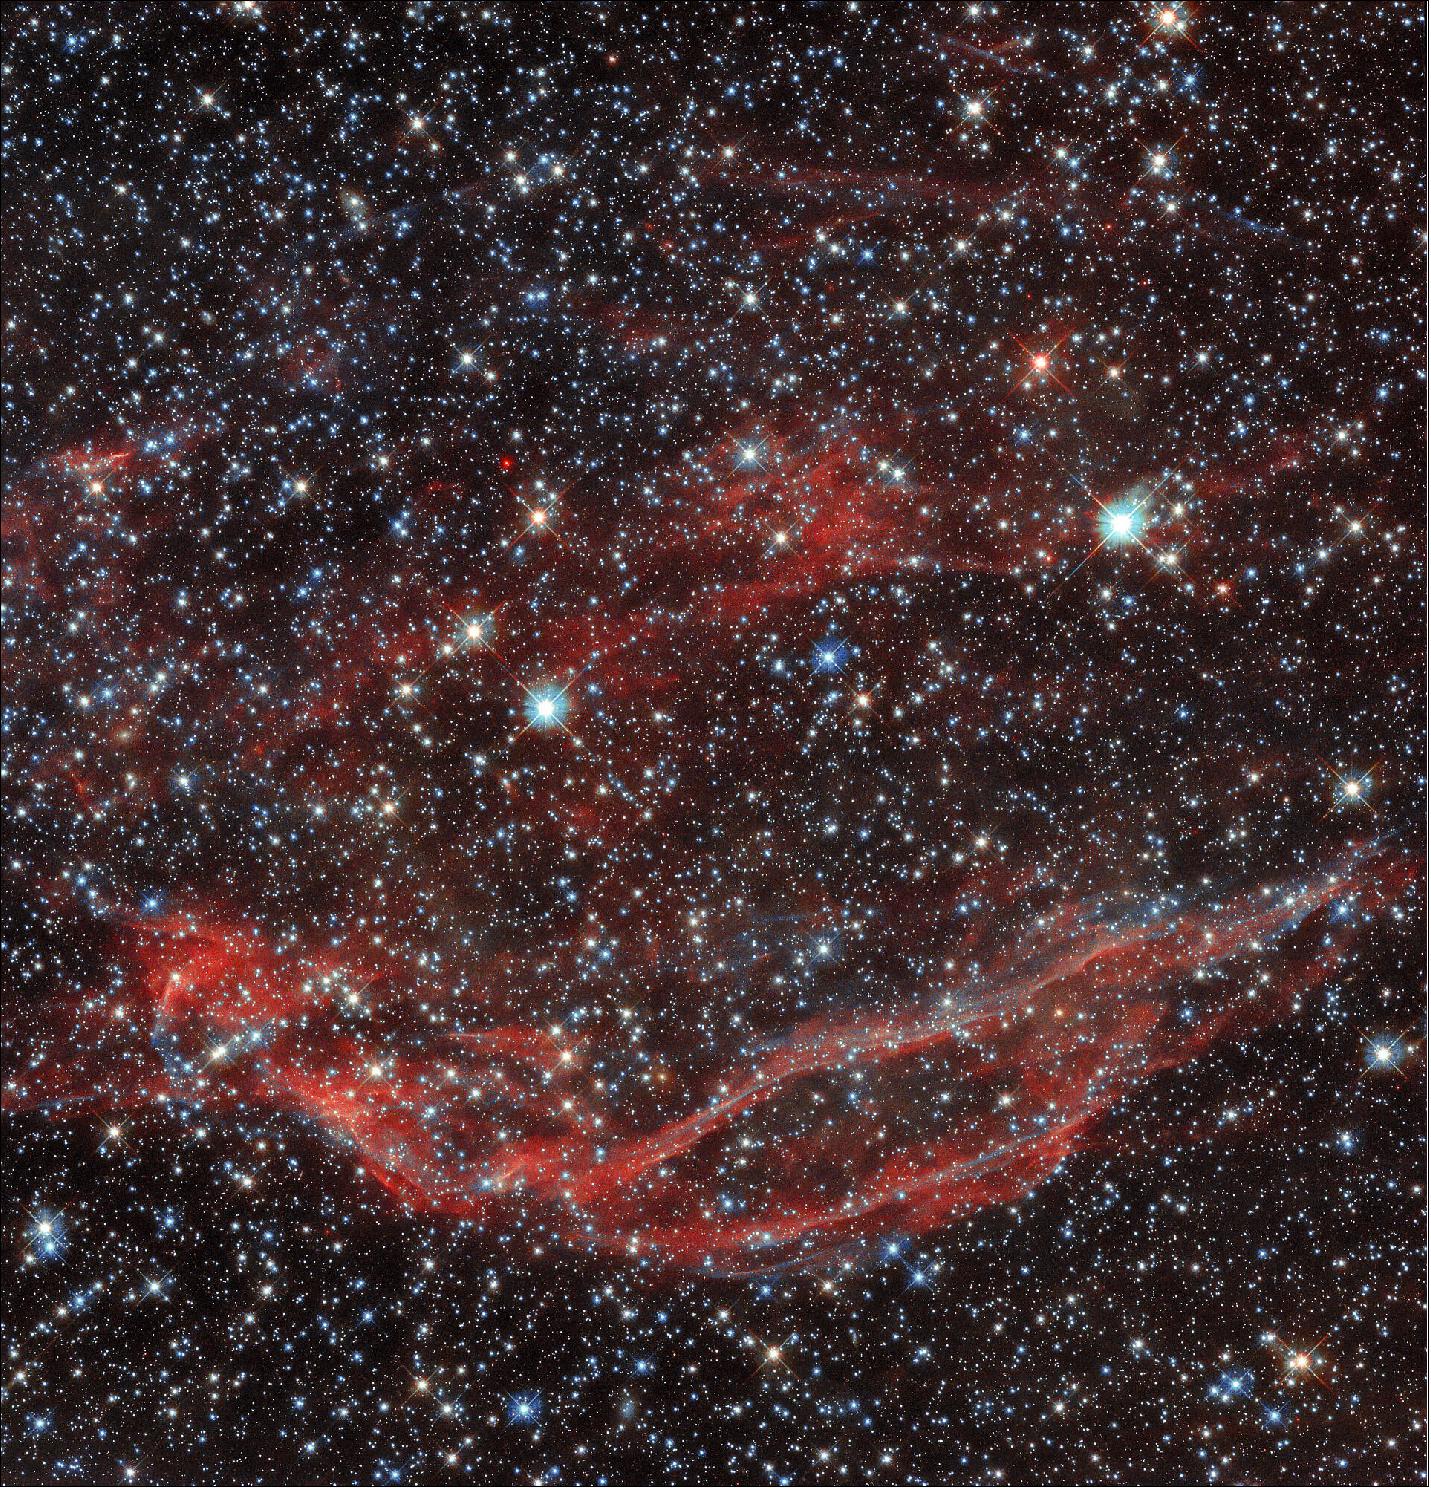 Figure 41: DEM L249 lies in the constellation Mensa and is within the Large Magellanic Cloud (LMC), a small satellite galaxy of the Milky Way only 160,000 light-years from Earth. The LMC is an ideal natural laboratory where astronomers can study the births, lives, and deaths of stars, as this region is nearby, oriented towards Earth, and contains relatively little light-absorbing interstellar dust. The data in this image were gathered by Hubble’s Wide Field Camera 3 instrument, and were obtained during a systematic search of the LMC for the surviving companions of white dwarf stars which have gone supernova (image credit: ESA/Hubble & NASA, Y. Chu; CC BY 4.0)